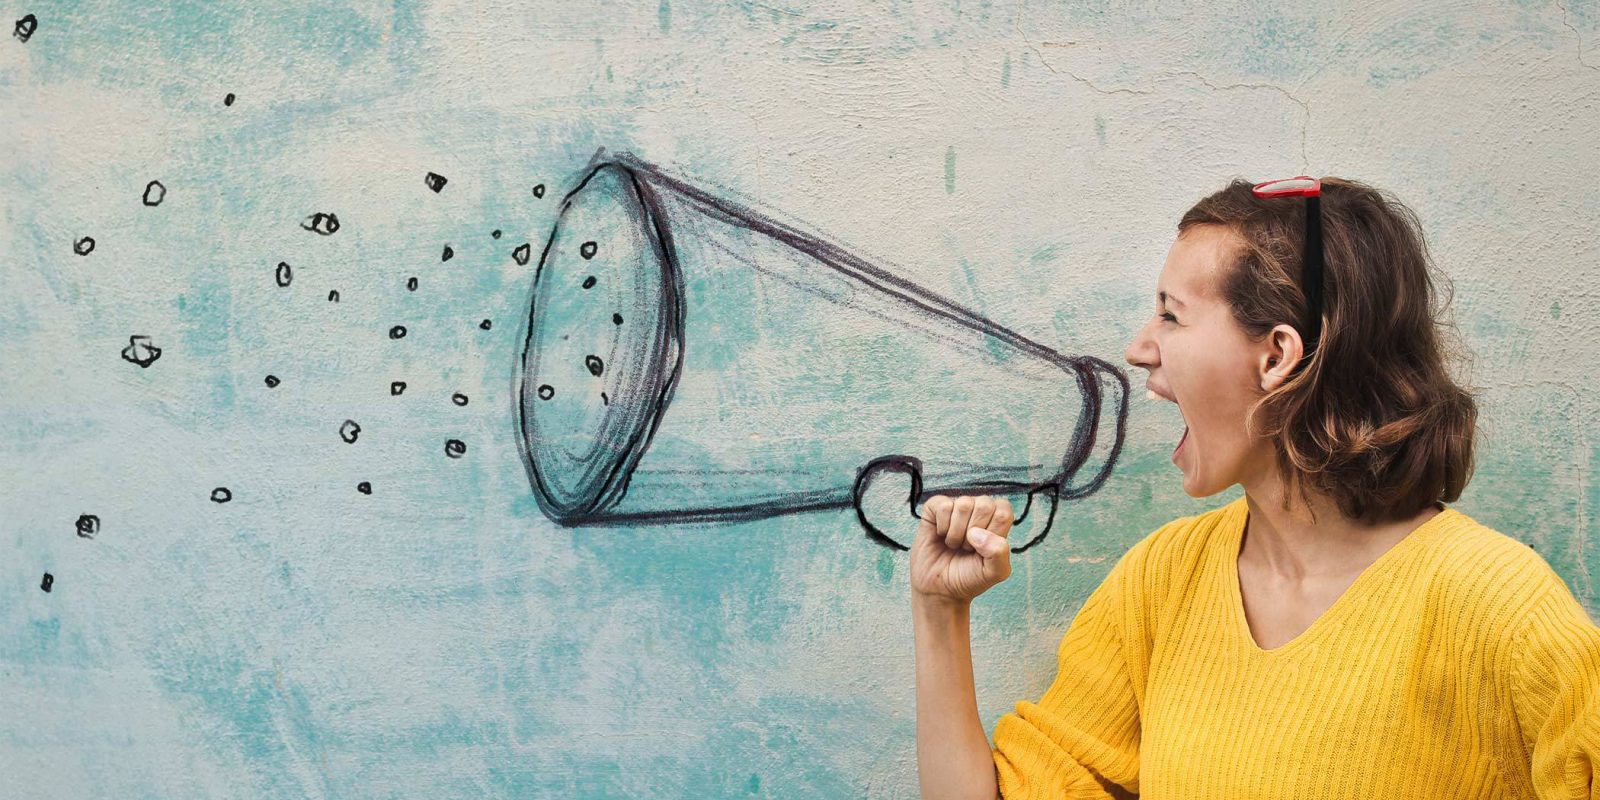 caucasian brunette woman in a yellow sweater yelling into a pretend megaphone about digital marketing services